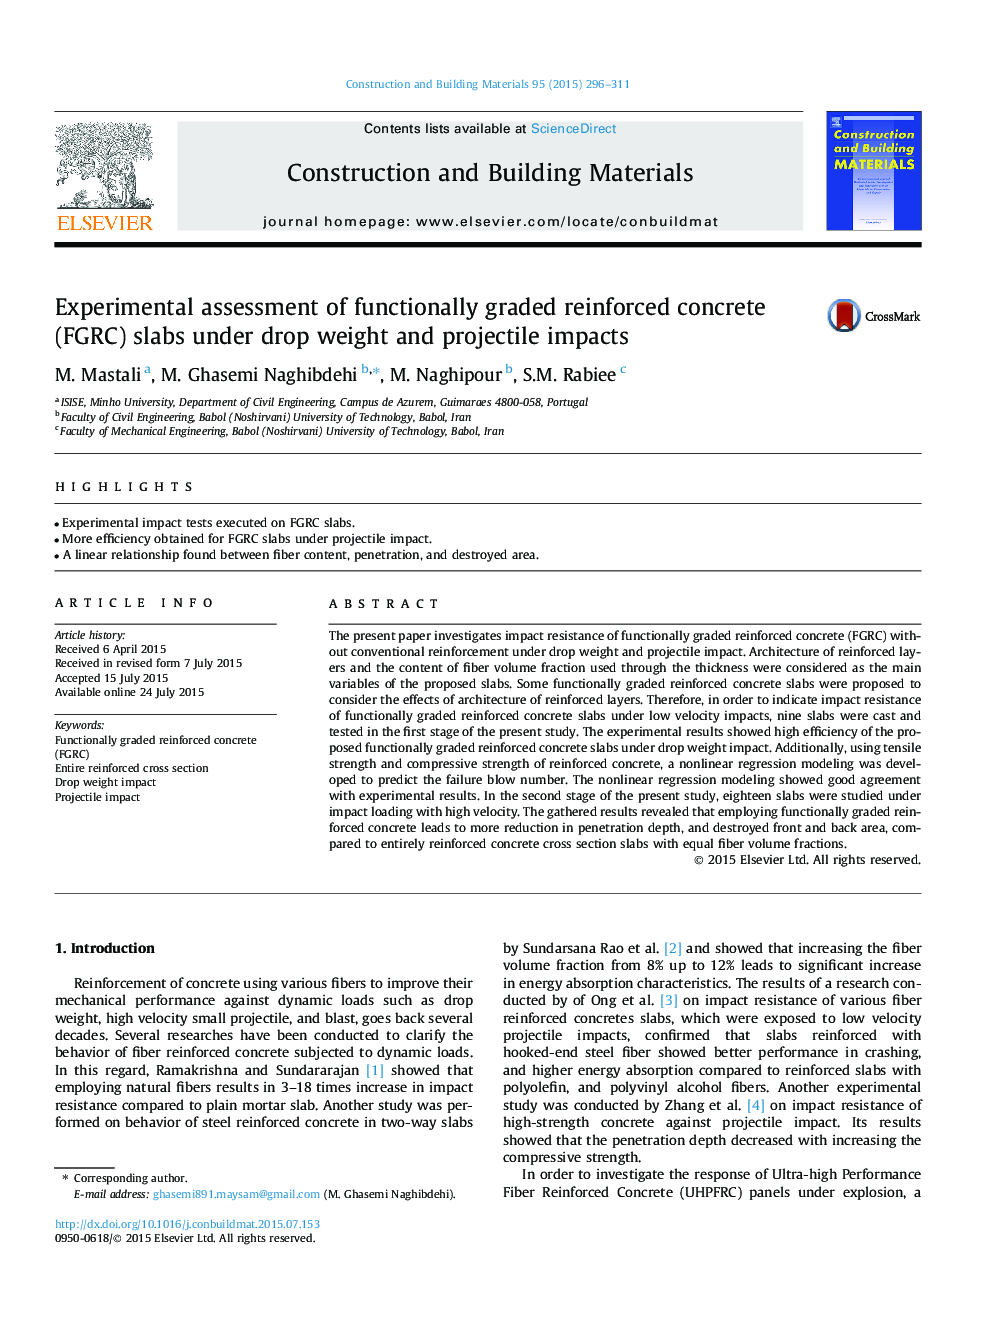 Experimental assessment of functionally graded reinforced concrete (FGRC) slabs under drop weight and projectile impacts